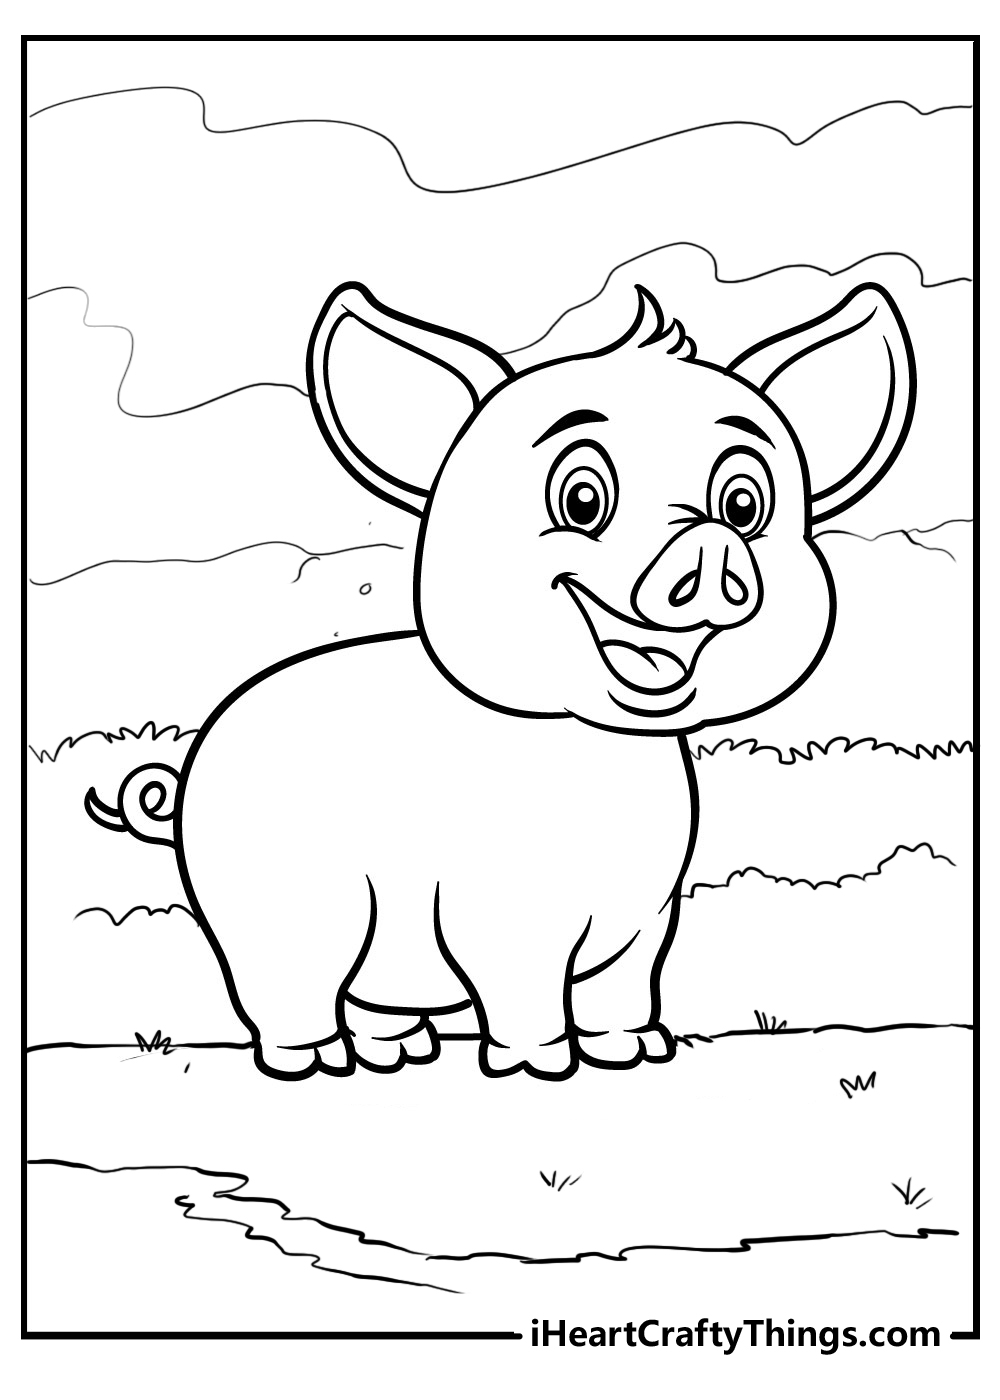 Piggy Coloring Pages Printable for Free Download